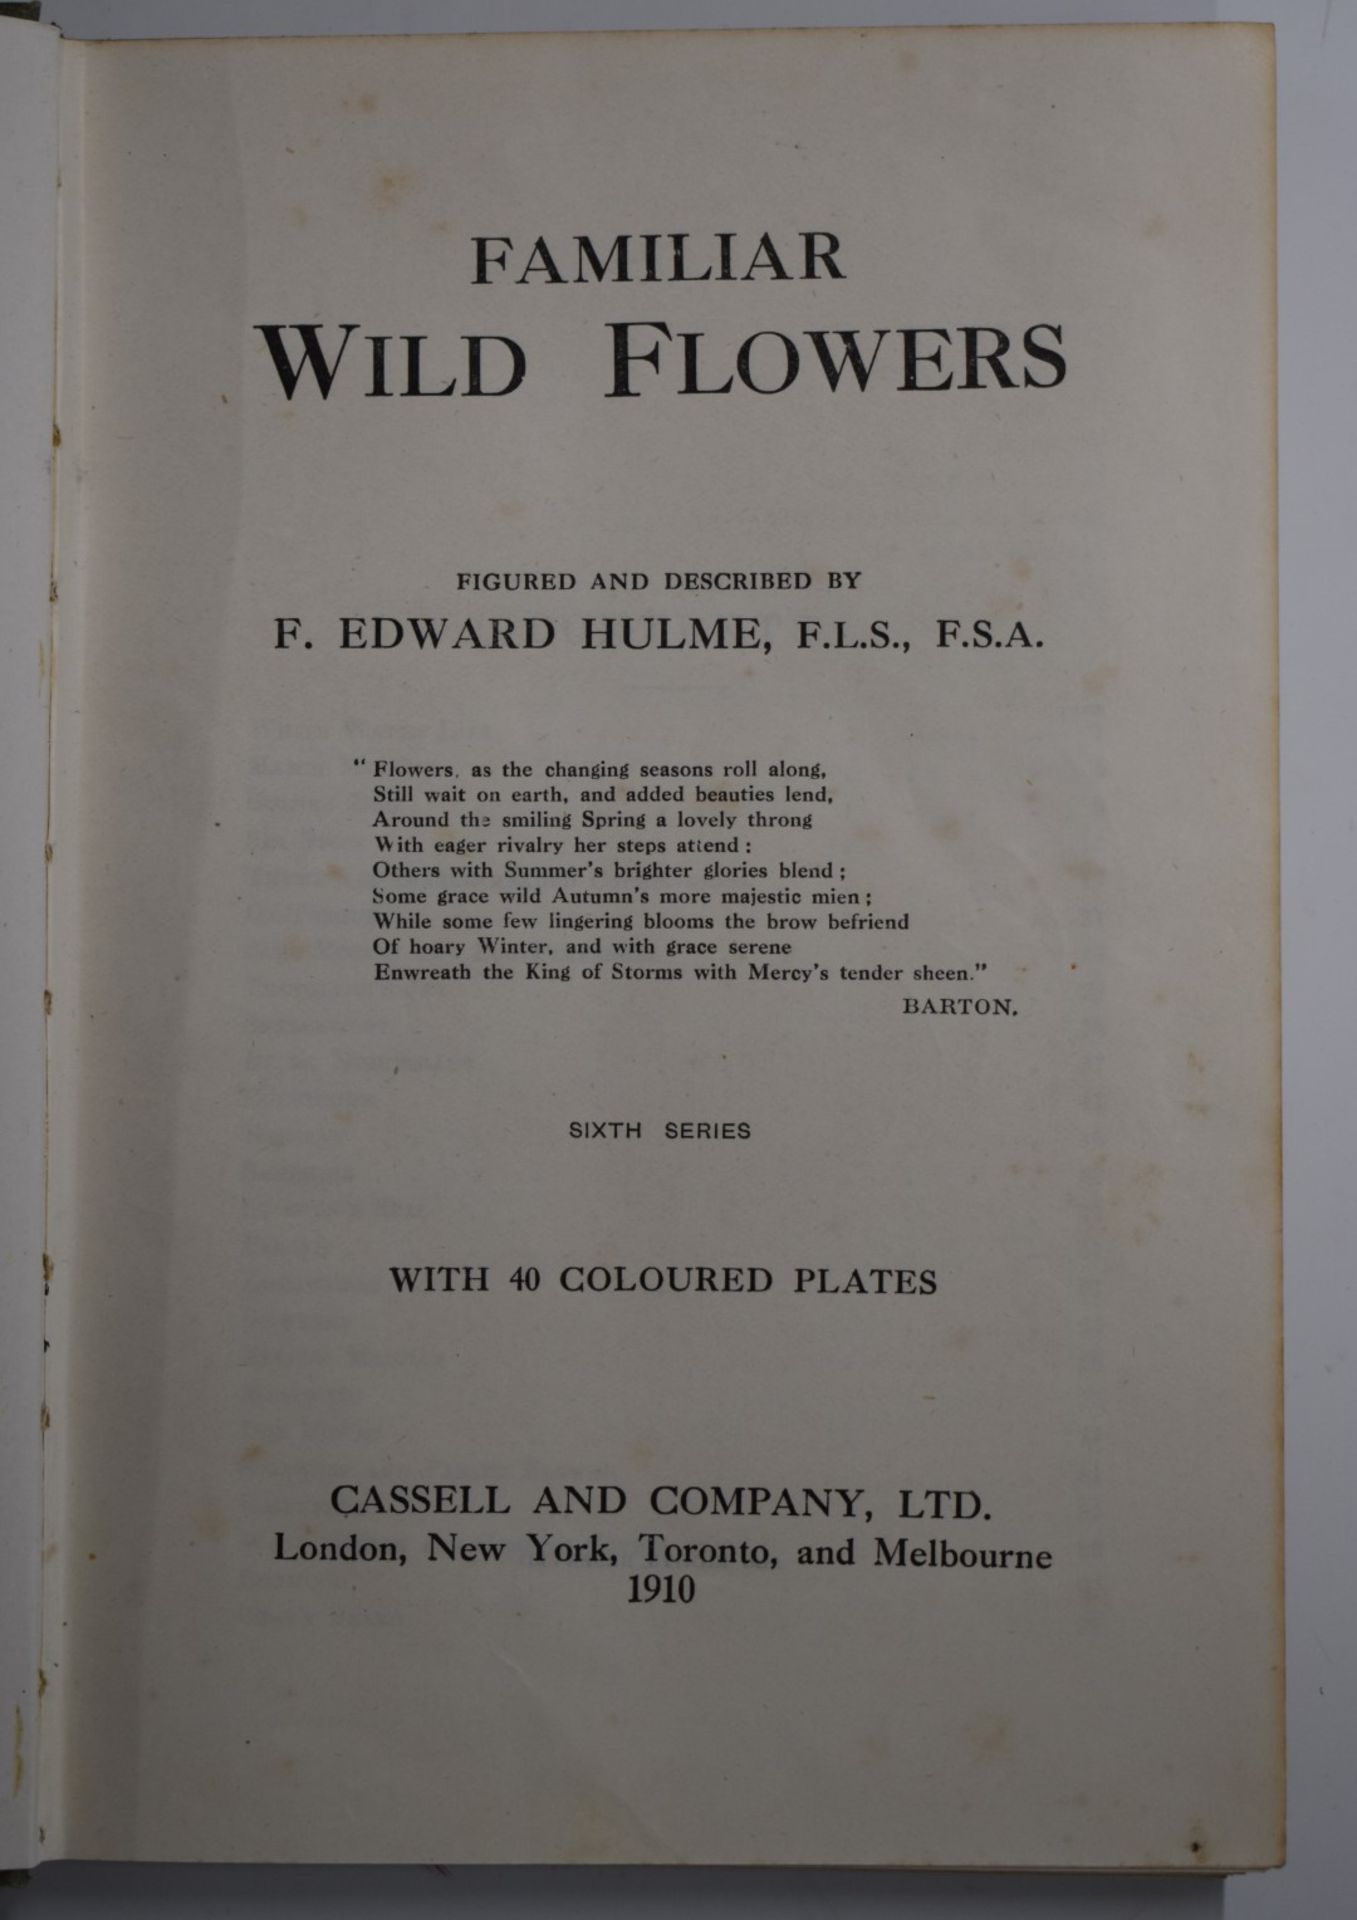 Familiar Wild Flowers Figured & Described by F. Edward Hulme illustrated with colour plates, - Image 3 of 3